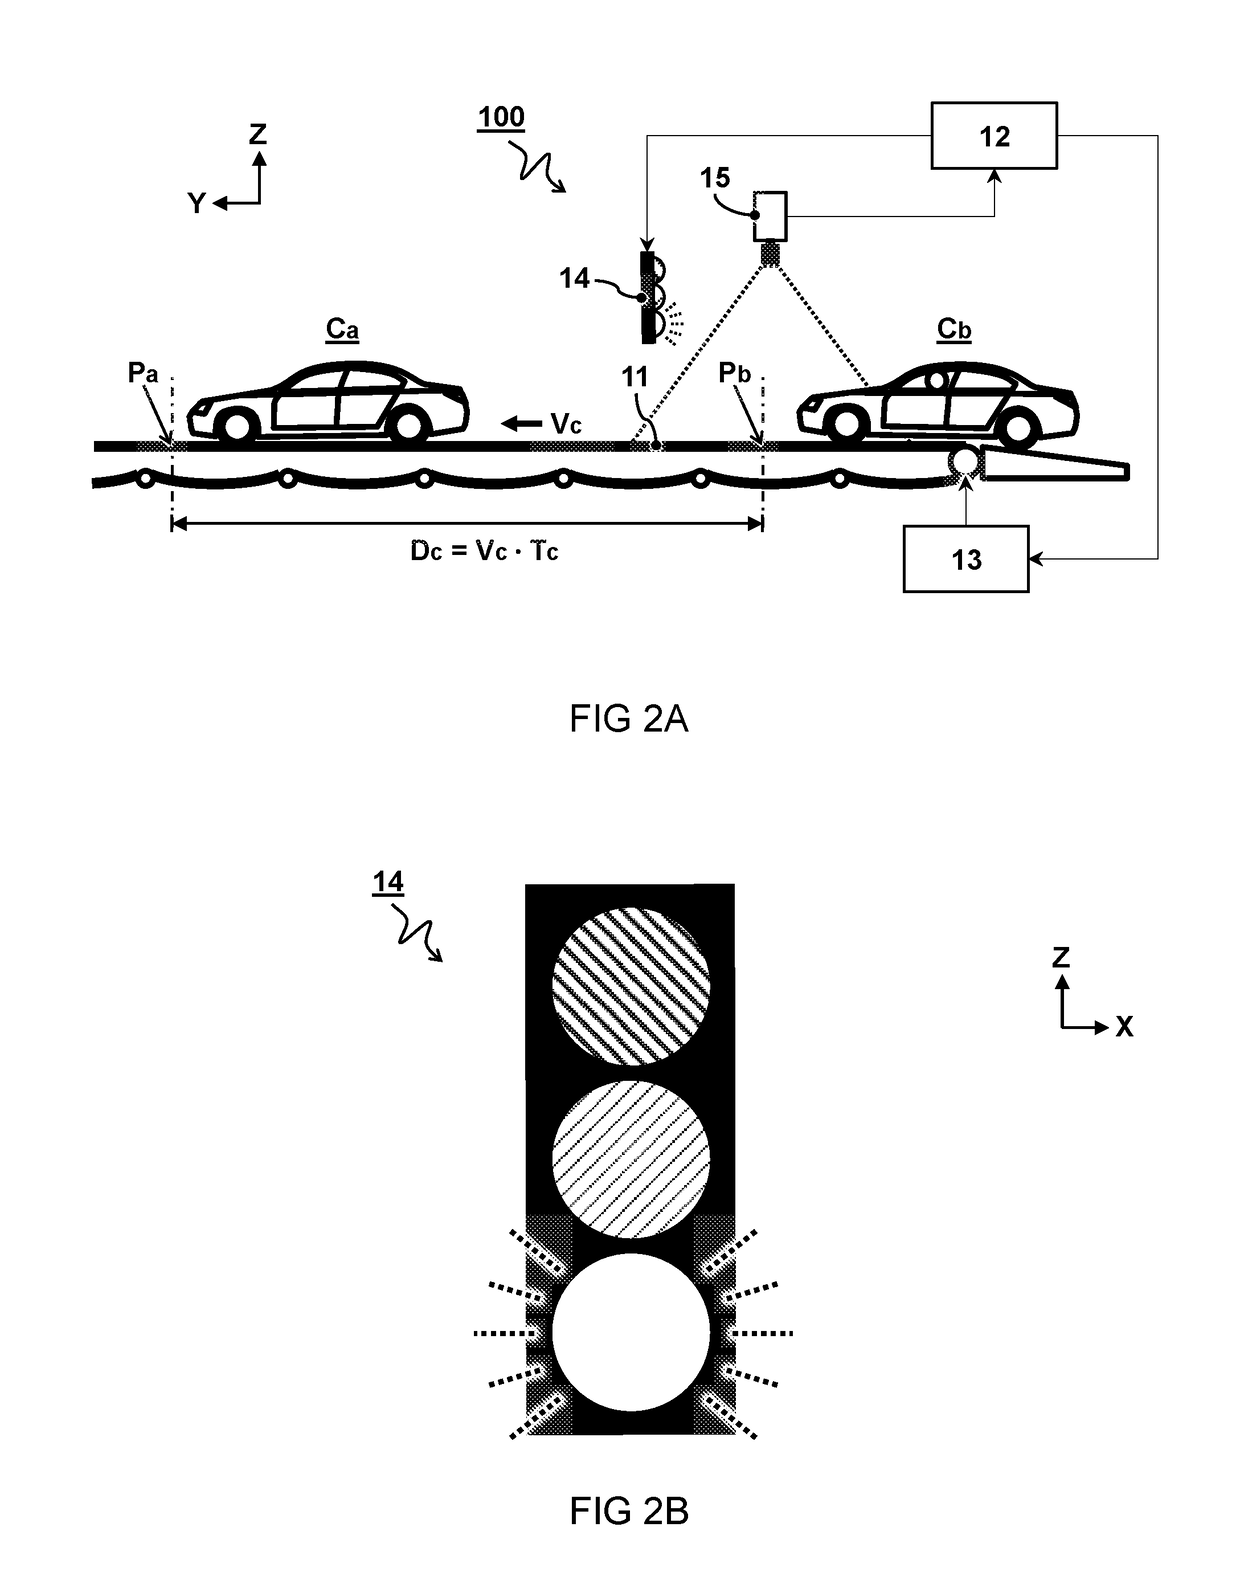 Planning system and method for maintaining a cycle time in an automobile factory